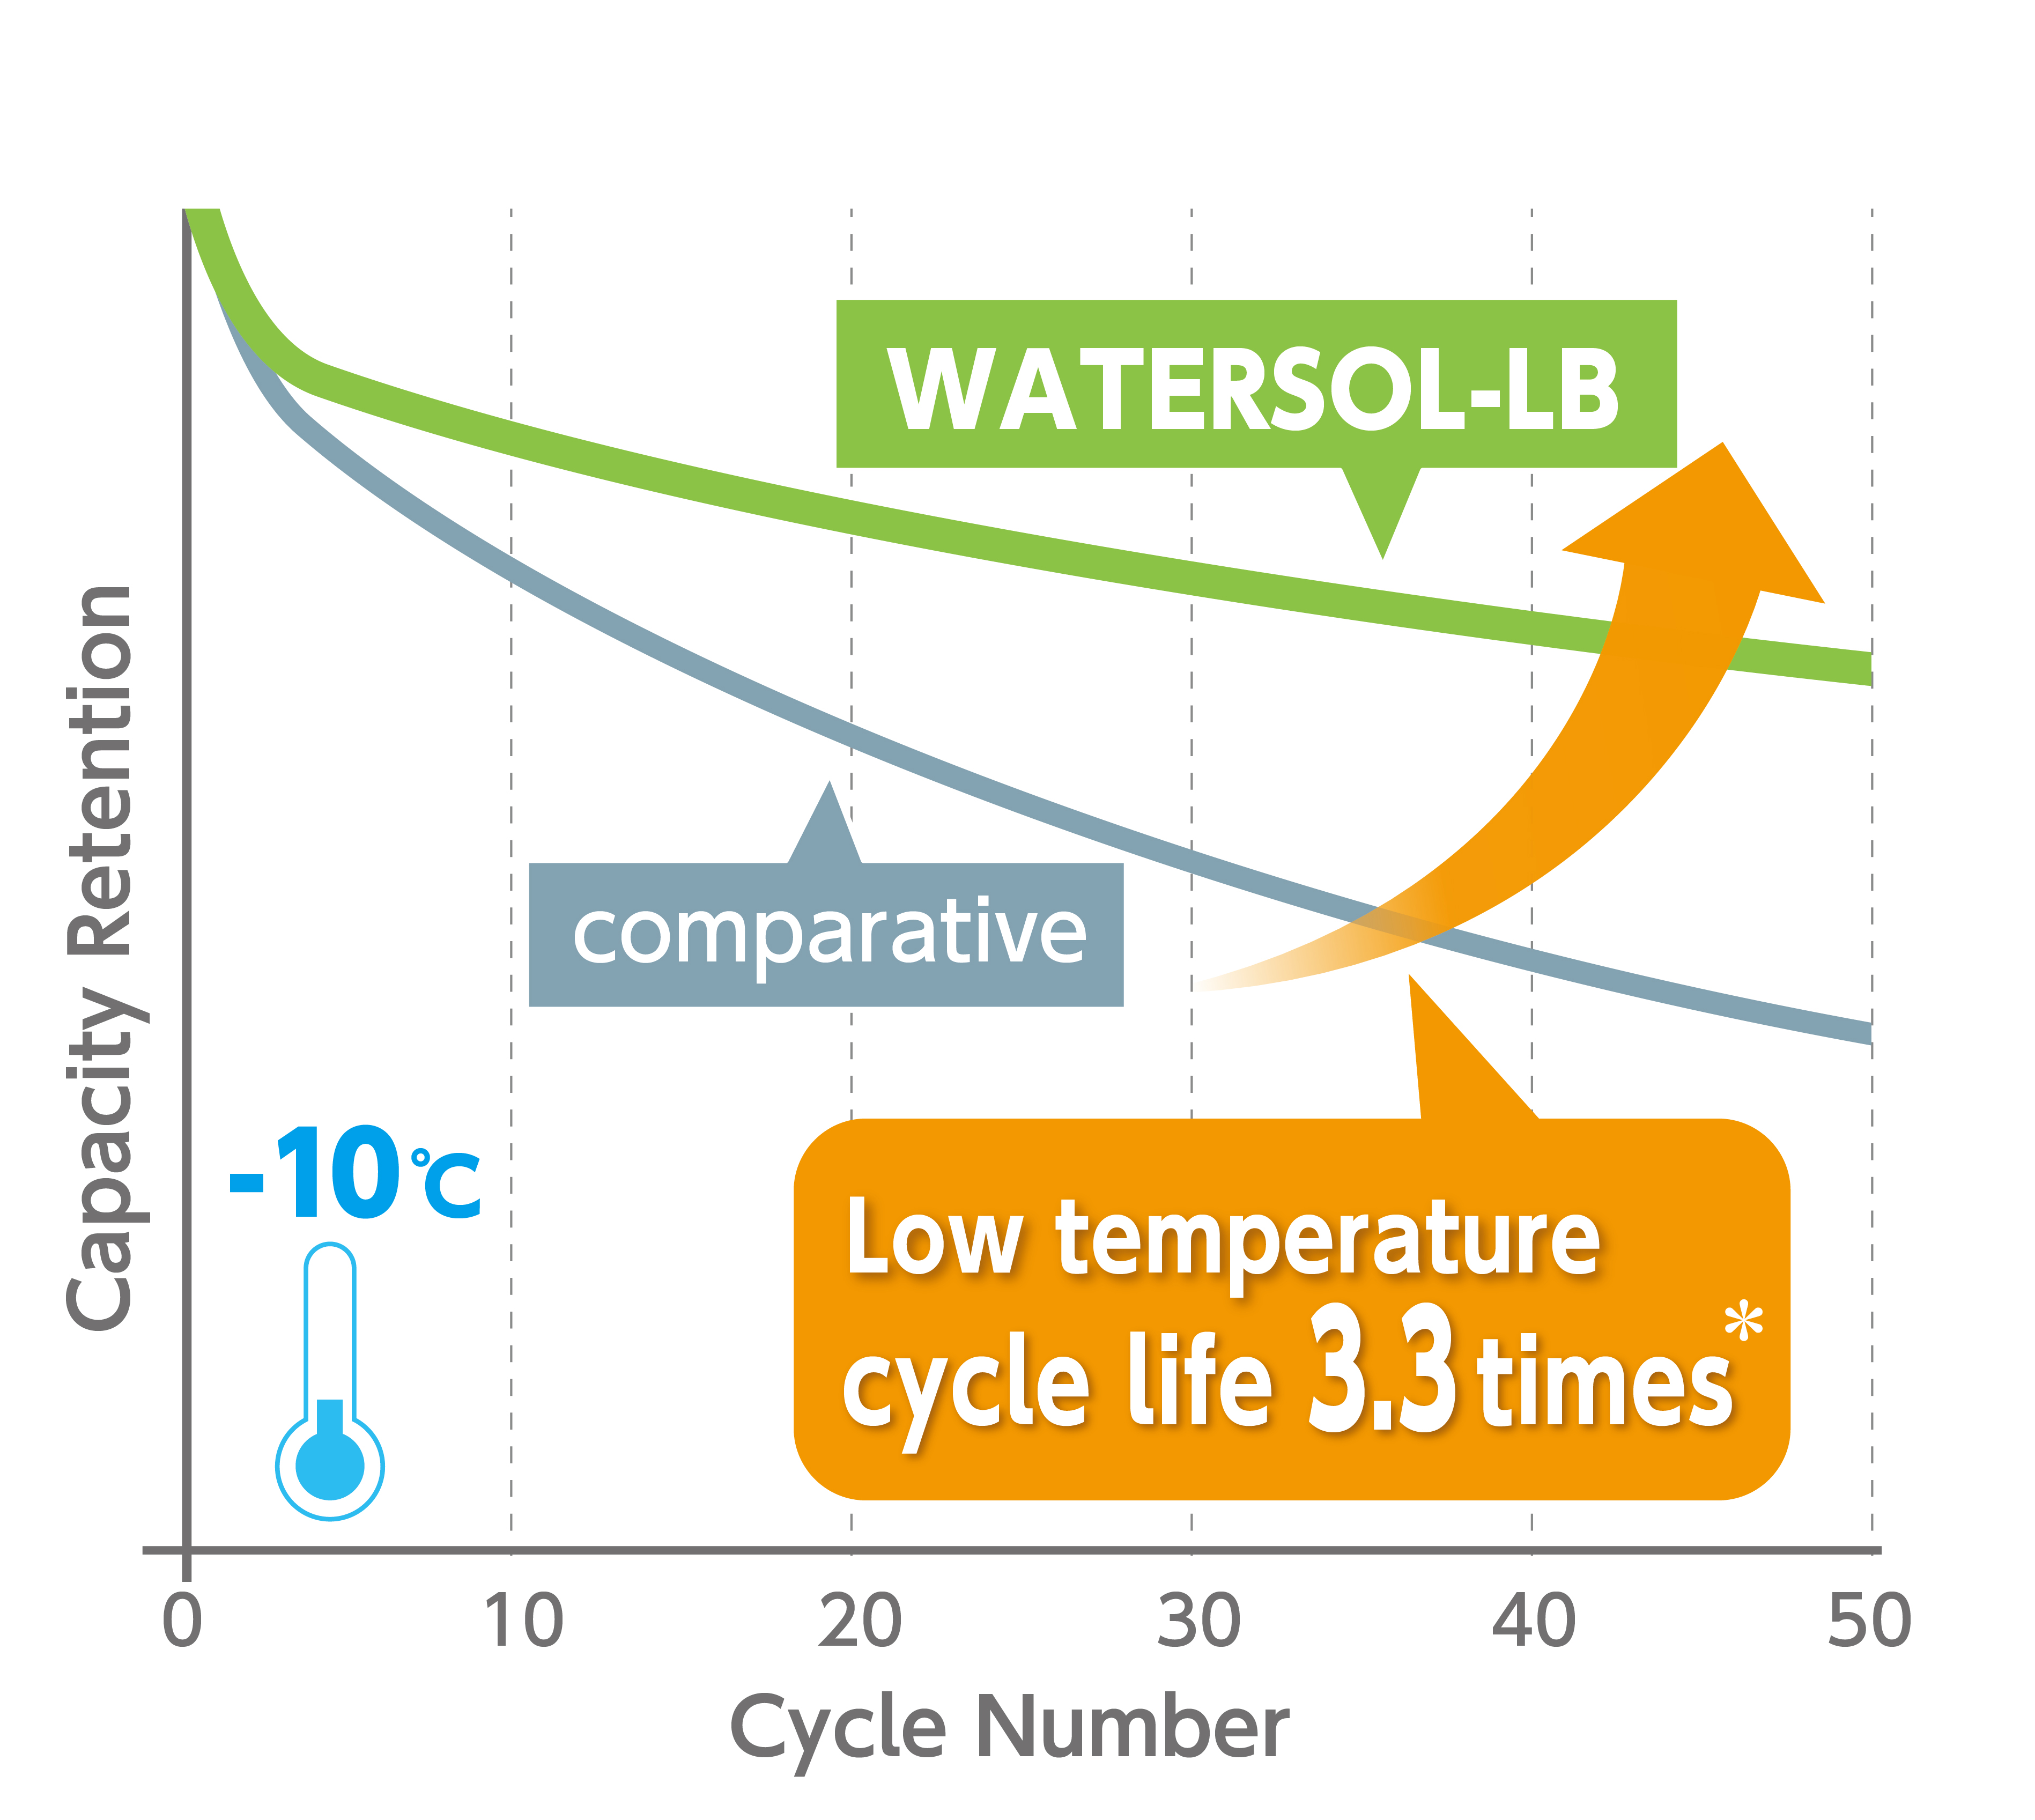 Cycle performance at -10℃